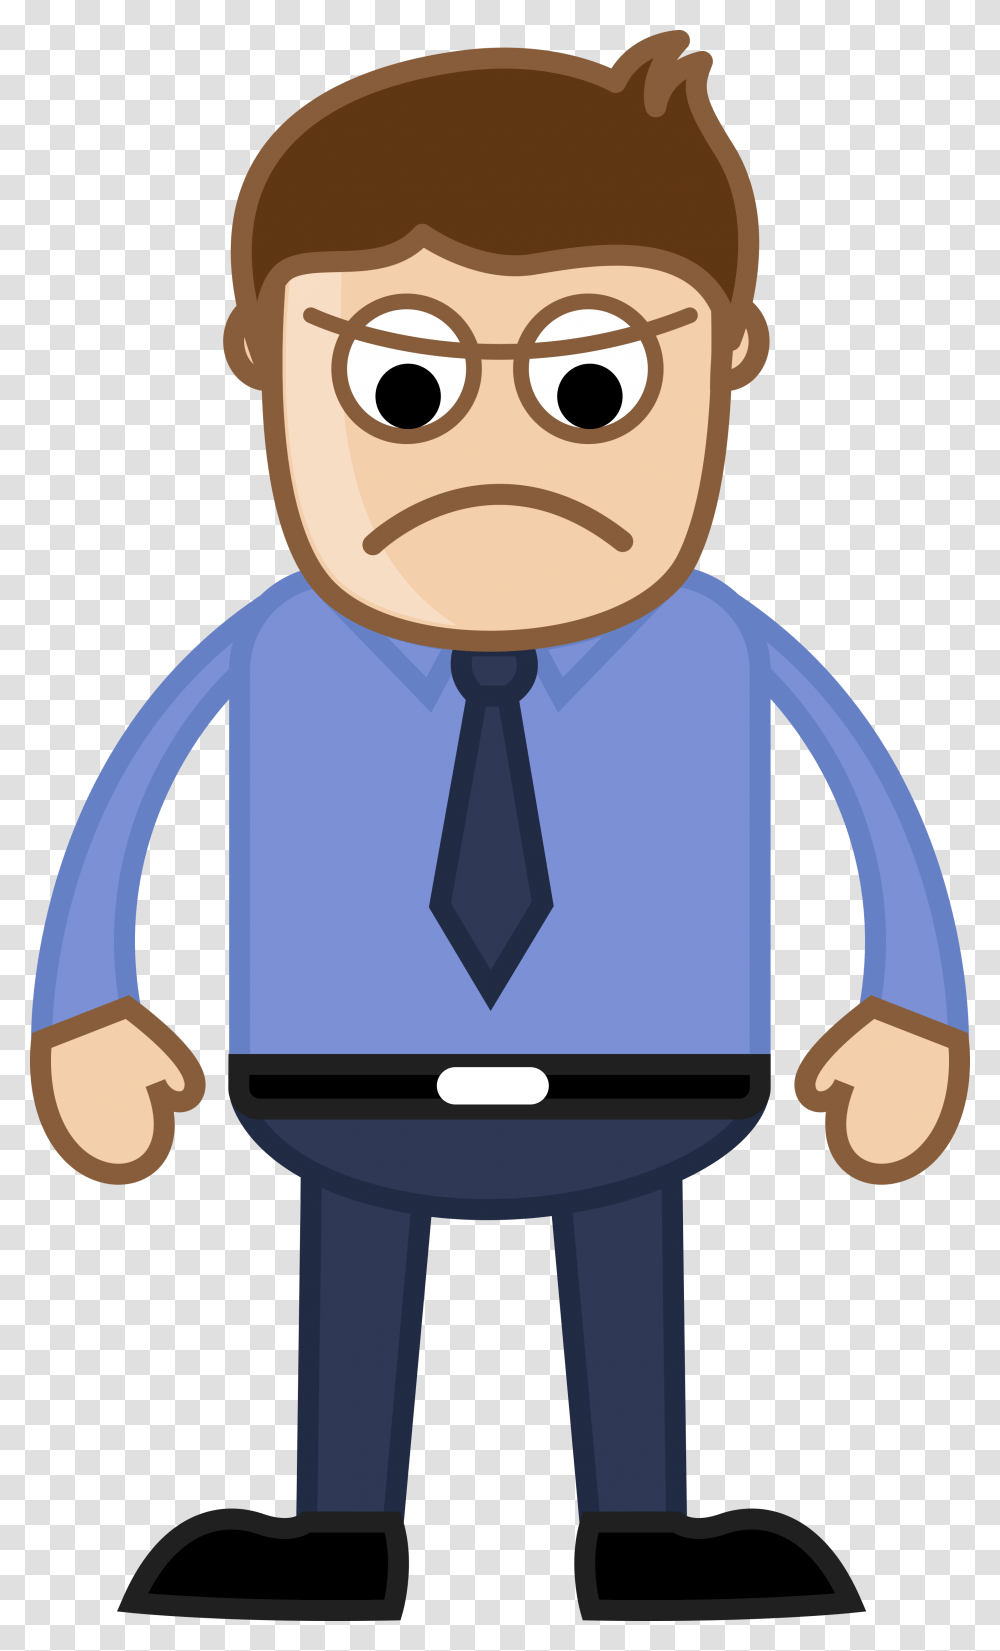 Free Stick Figure People Trophy, Performer, Chef, Magician Transparent Png